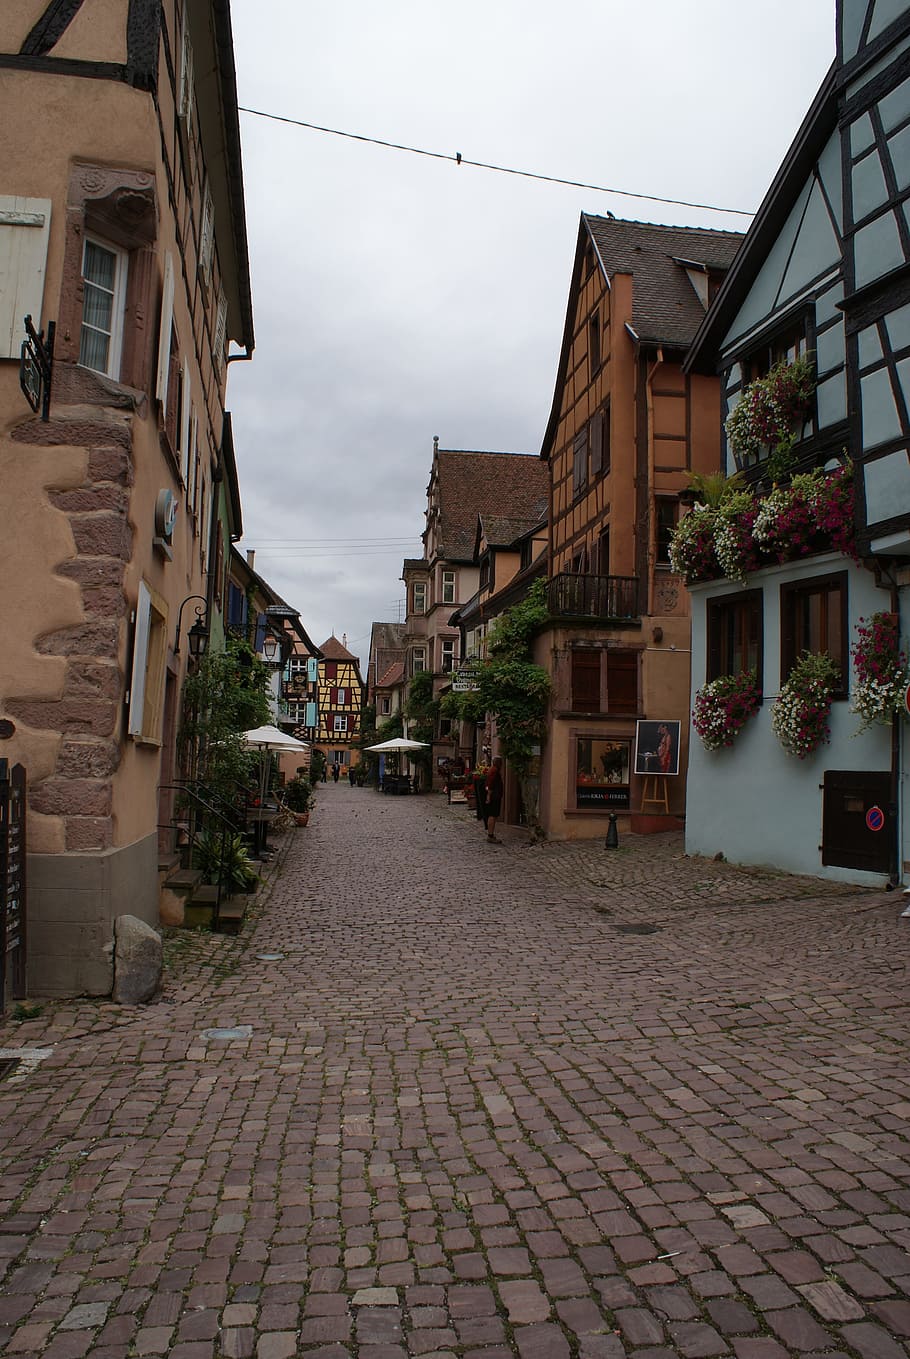 medieval, town, walls, alsace france, historic, old, europe, building, architecture, ancient